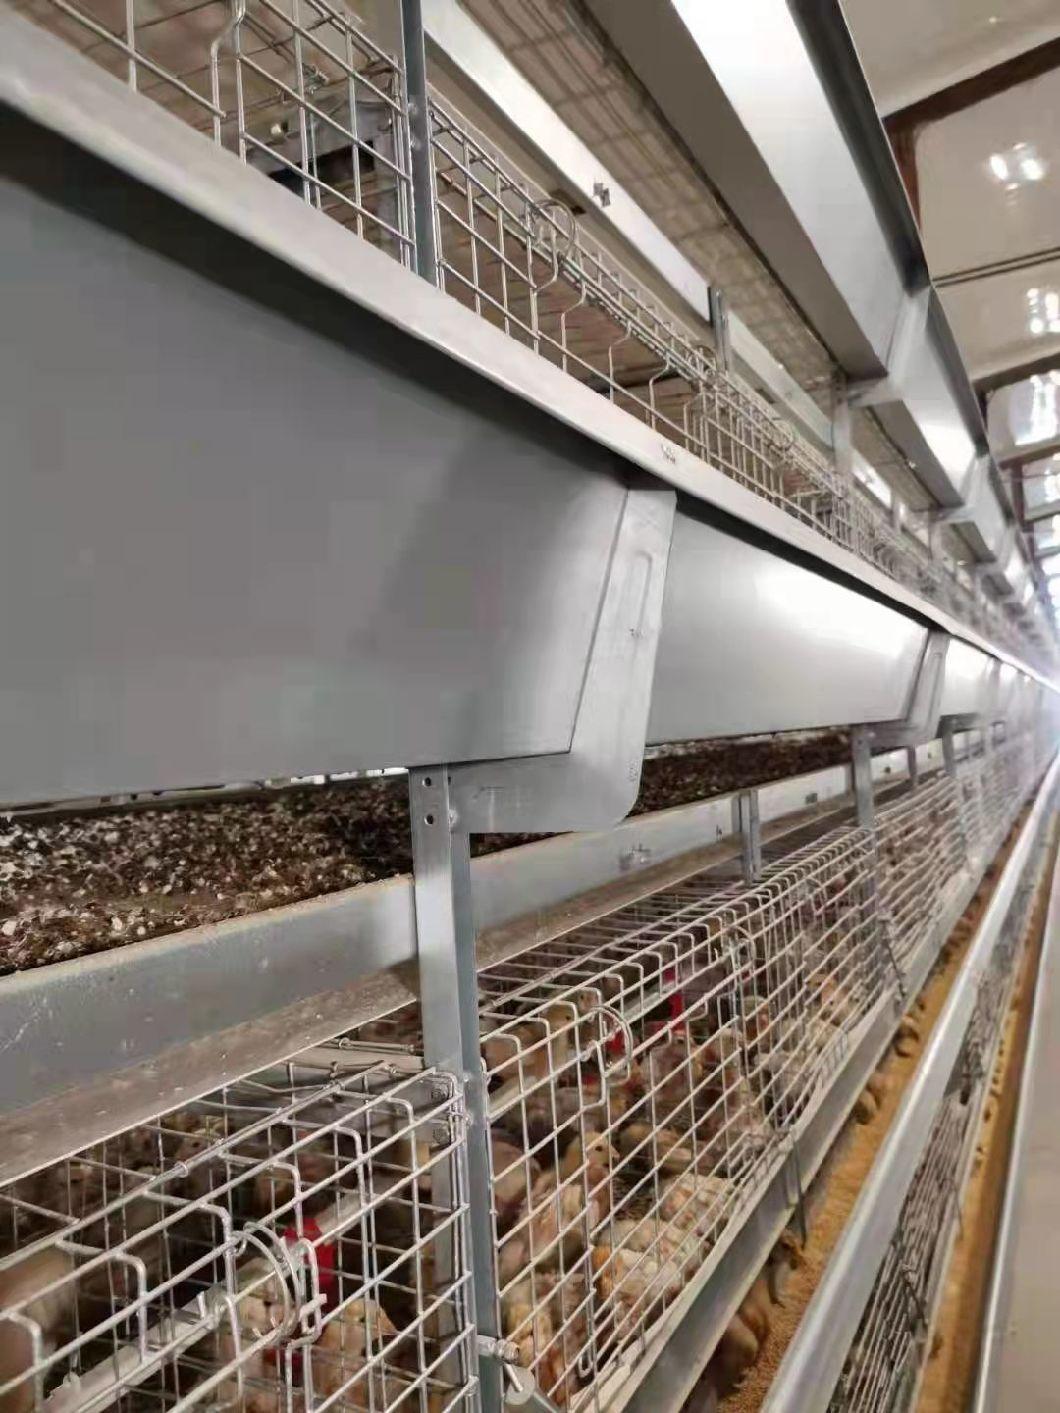 Hot Selling Good Quality UAE Farm Poultry Equipment for Sale Chicken Layer Cage Animal Cage Battery Cage